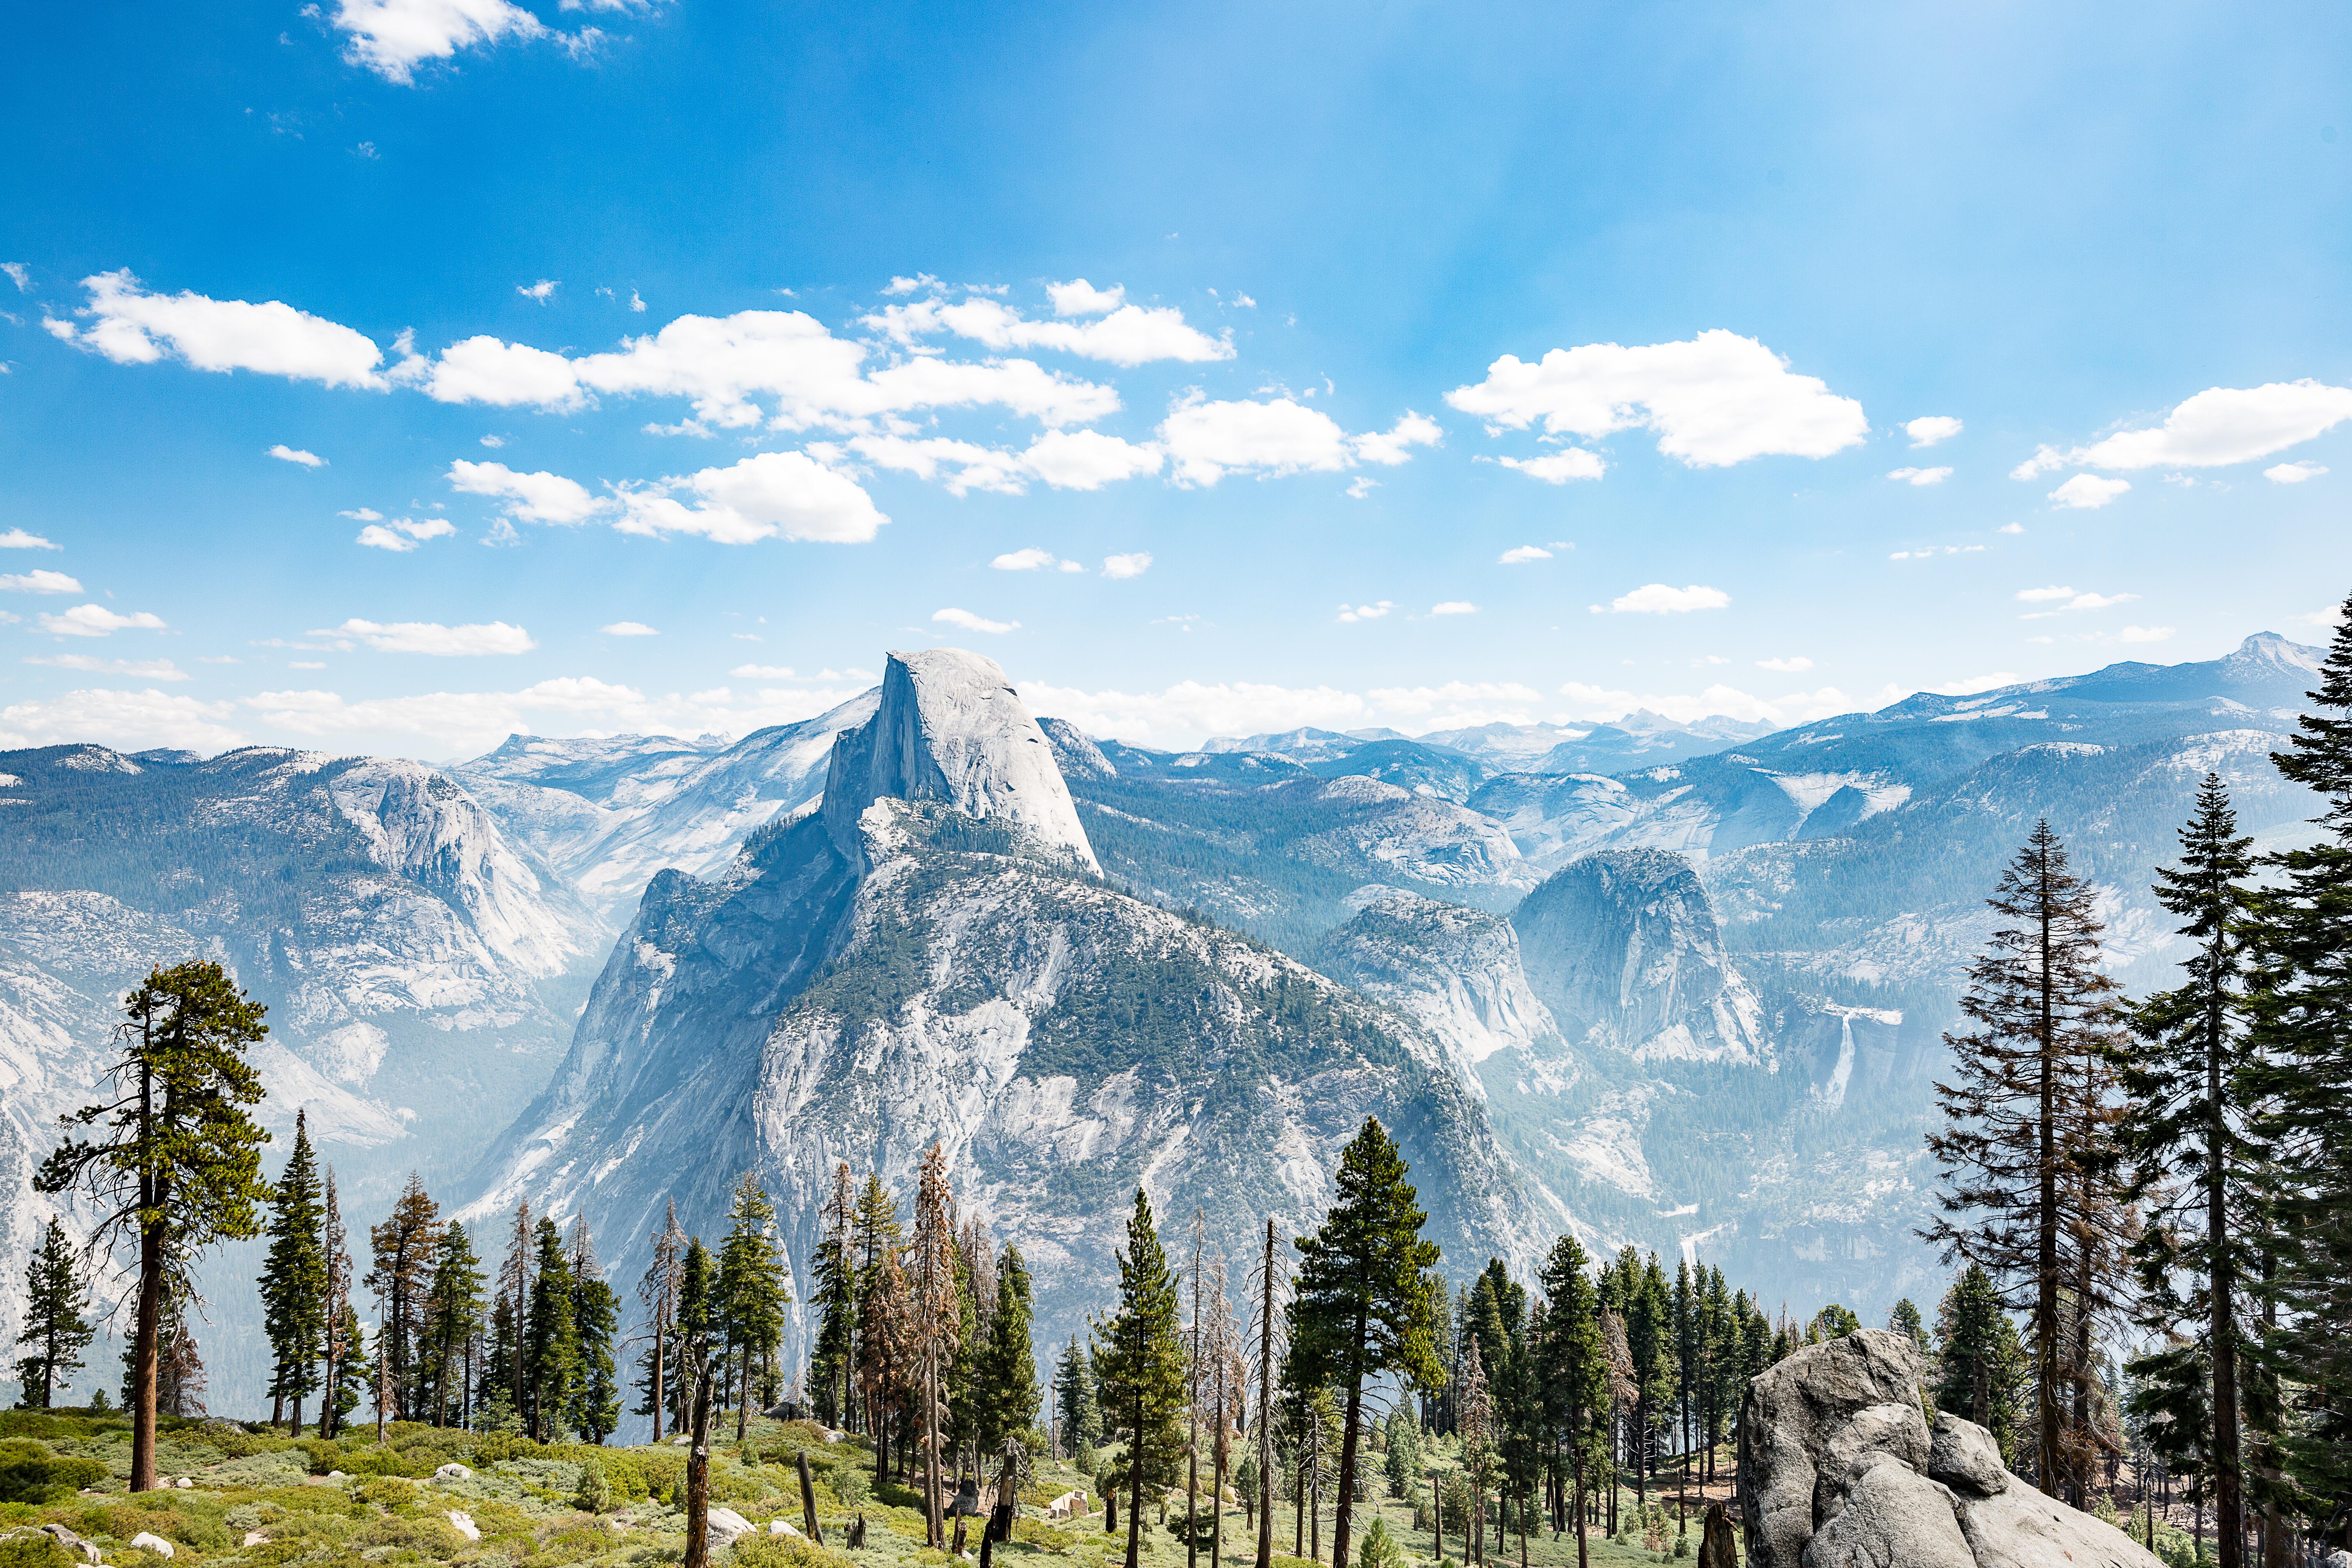 The Best View of Yosemite National Park [5697x3798]